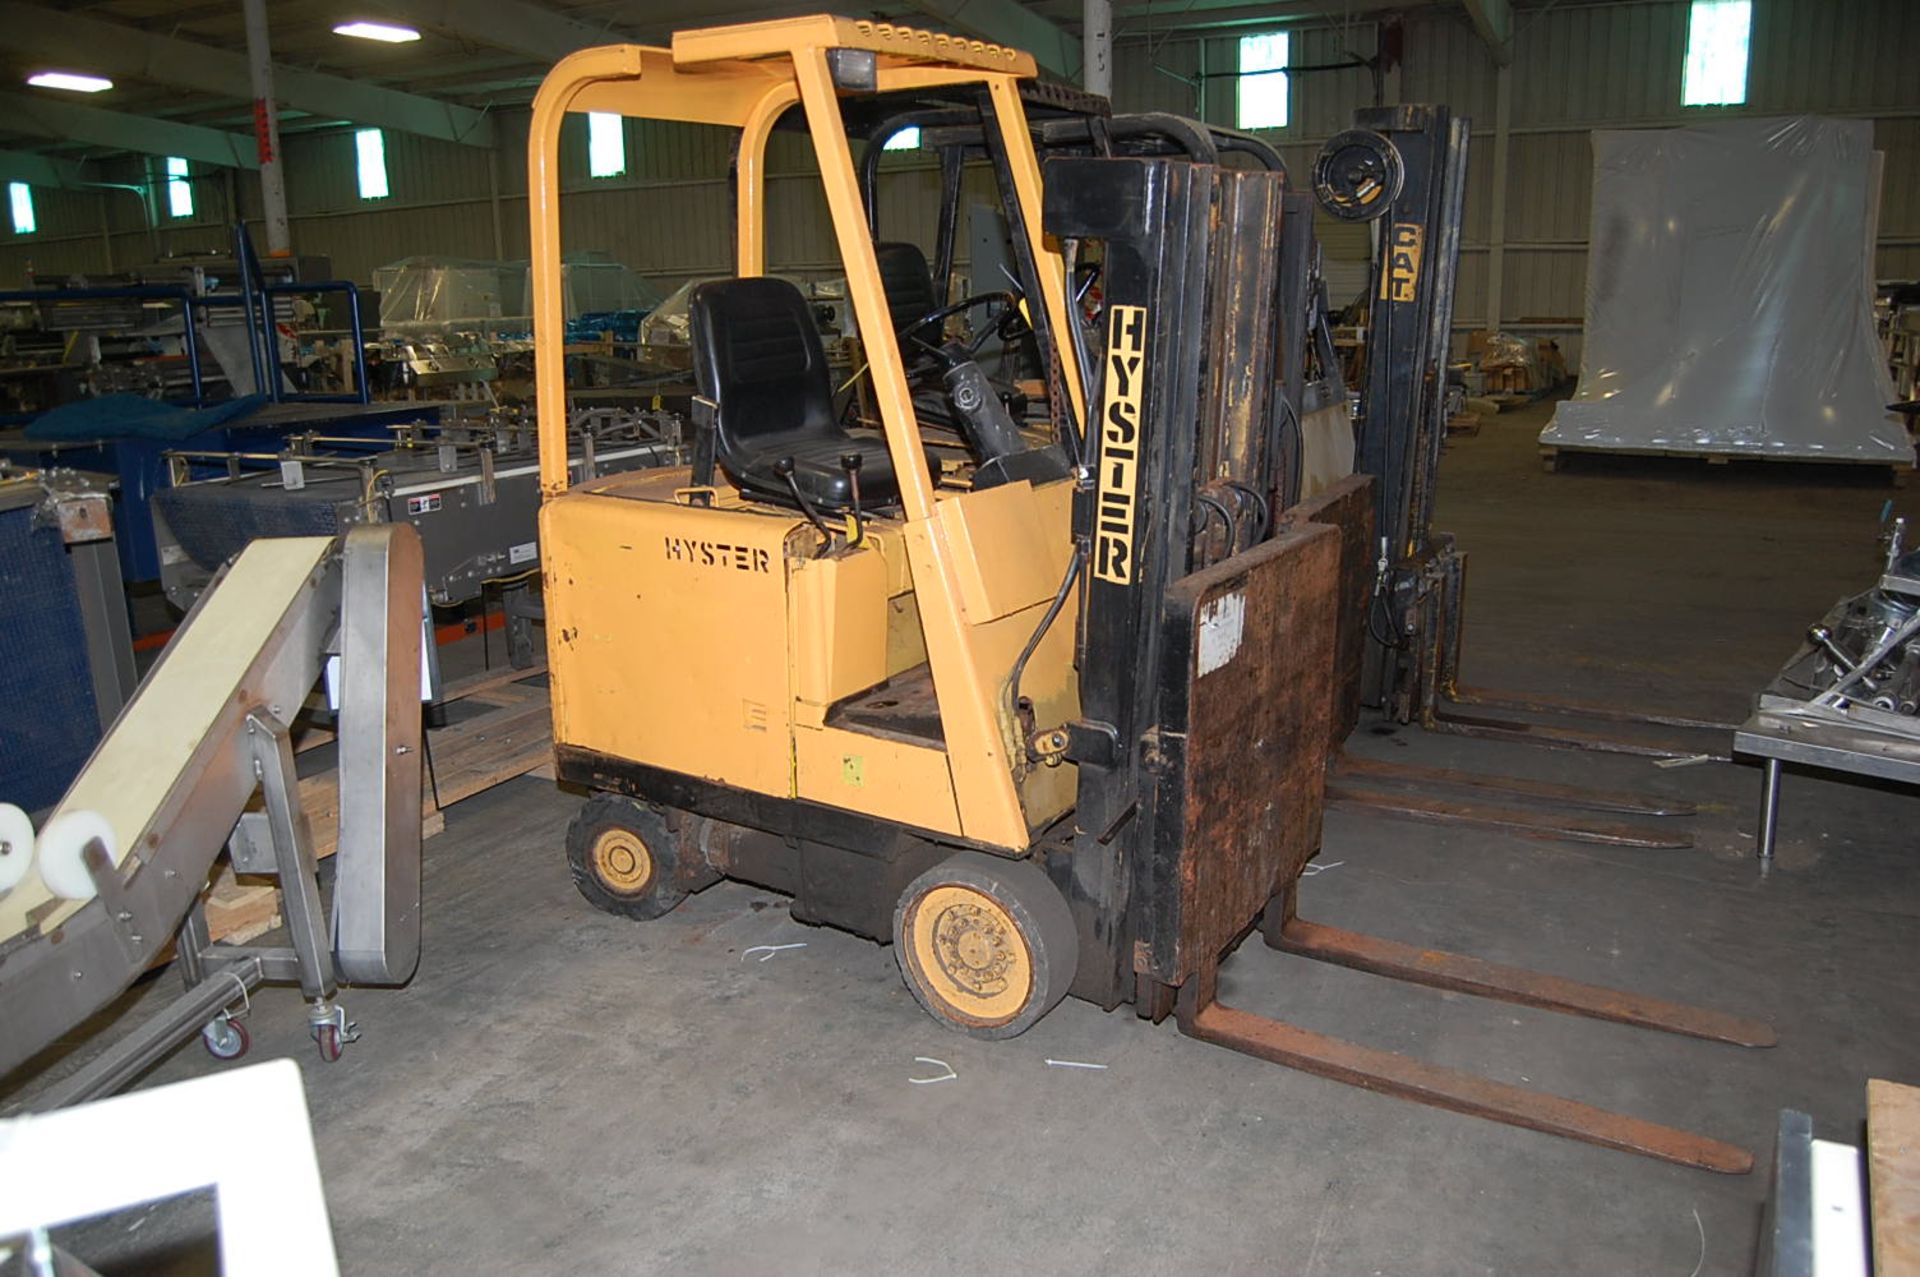 Hyster Electric Fork Lift, 36 Volt Battery, Approx. 2500 lbs. Capacity, Solid Tires, Rops - RIGGING